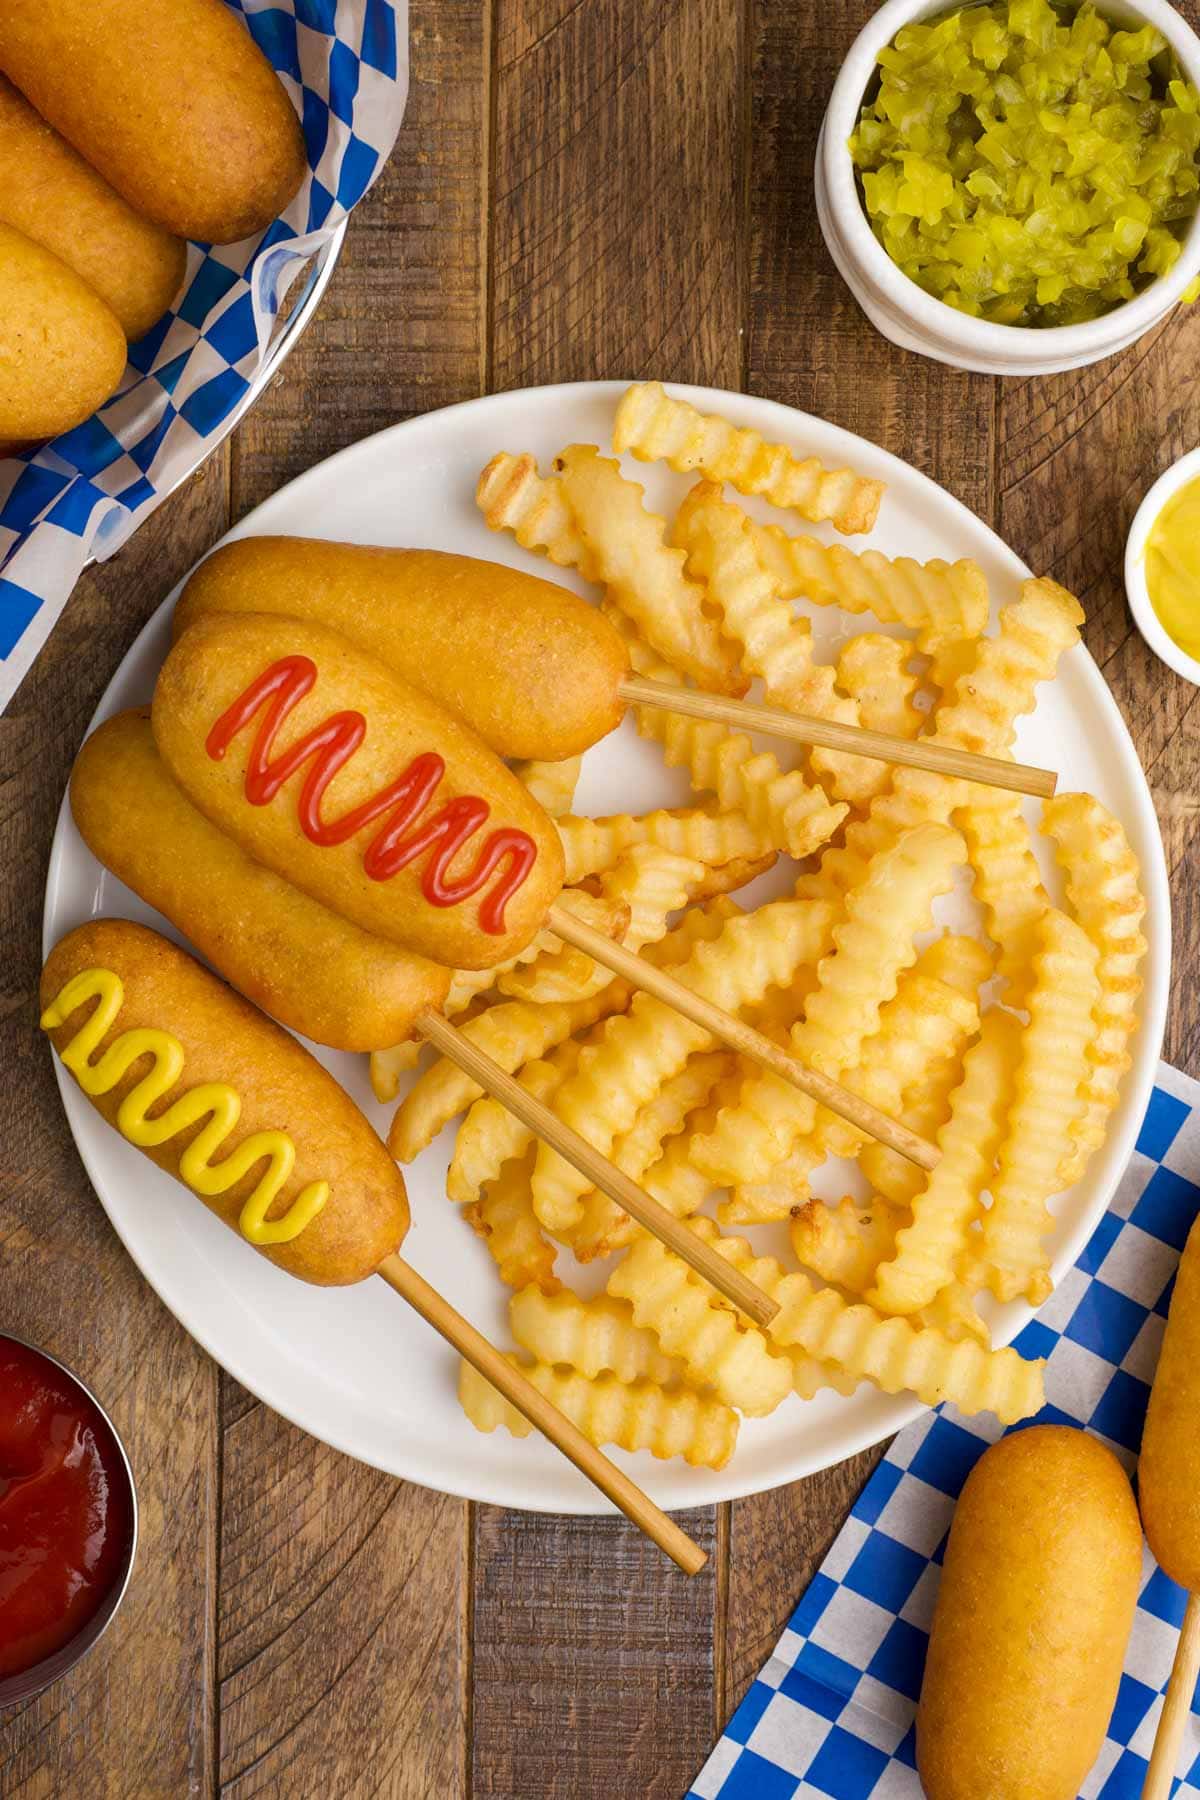 Corn dogs with ketchup and mustard and french fries on a white plate.